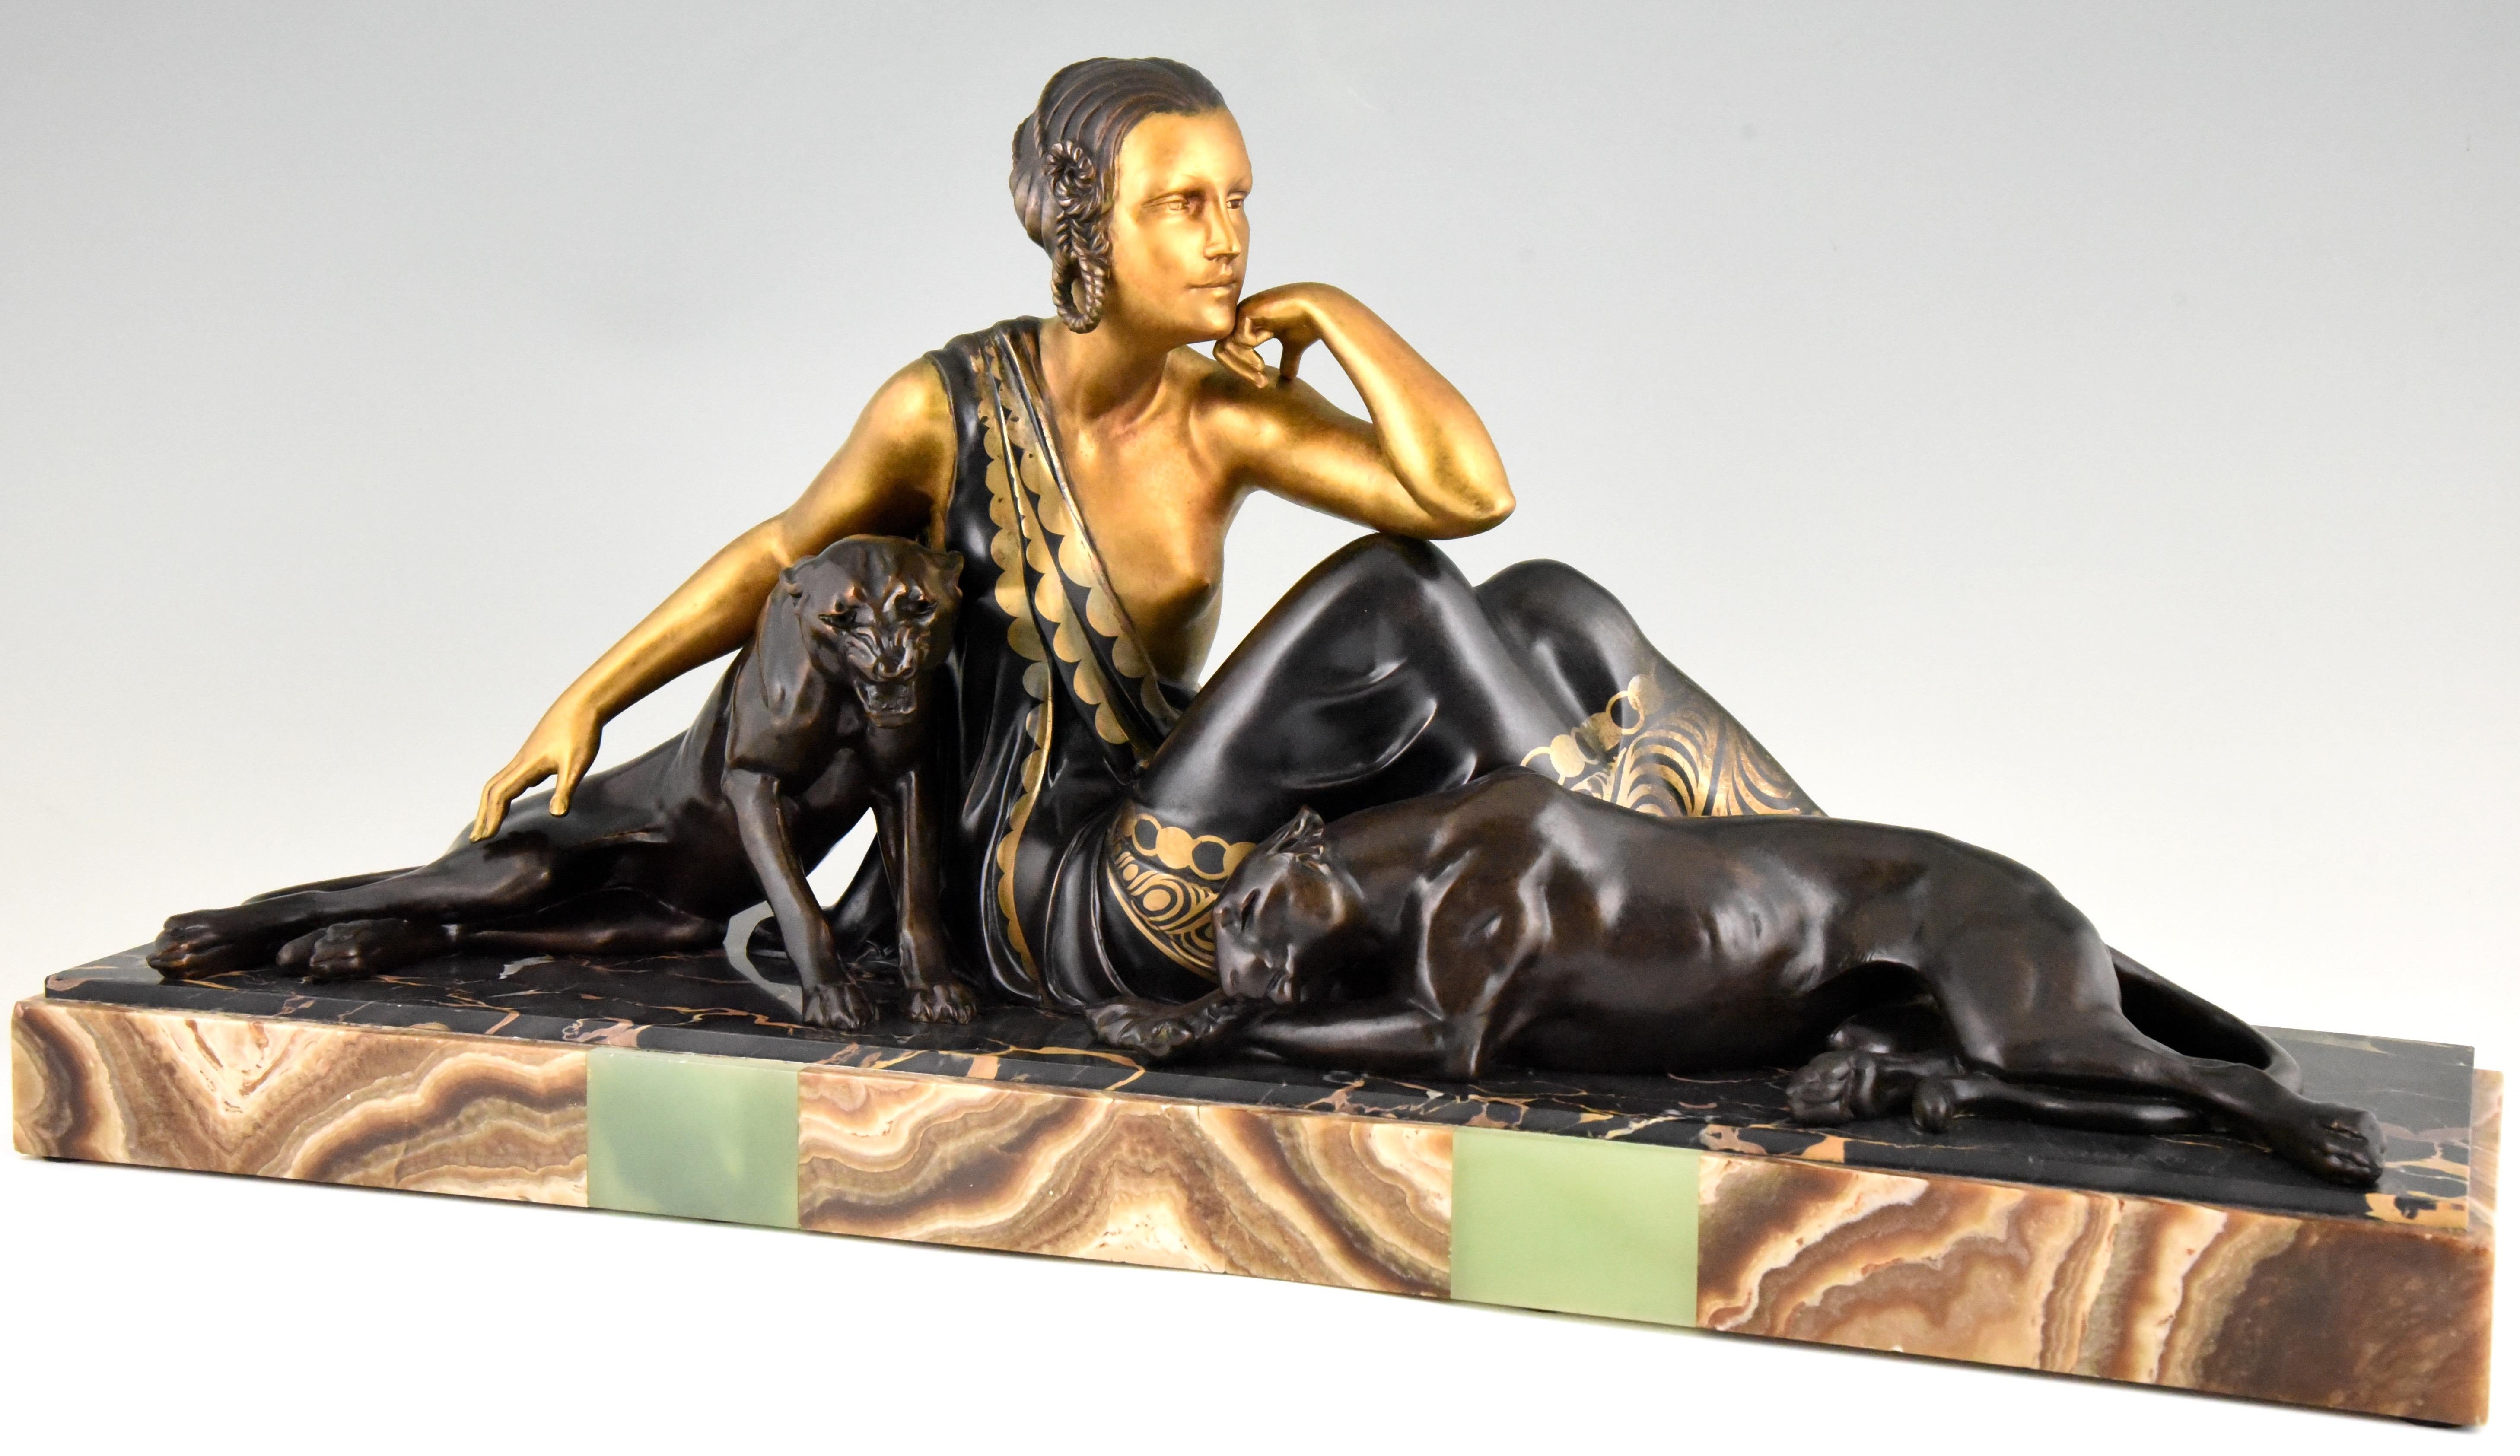 Impressive Art Deco group of a lady with two panthers. This large sculpture has a lovely patina and is mounted on a beautiful marble base. This version with two panthers is very hard to find. Signed by the French artist Armand Godard, circa